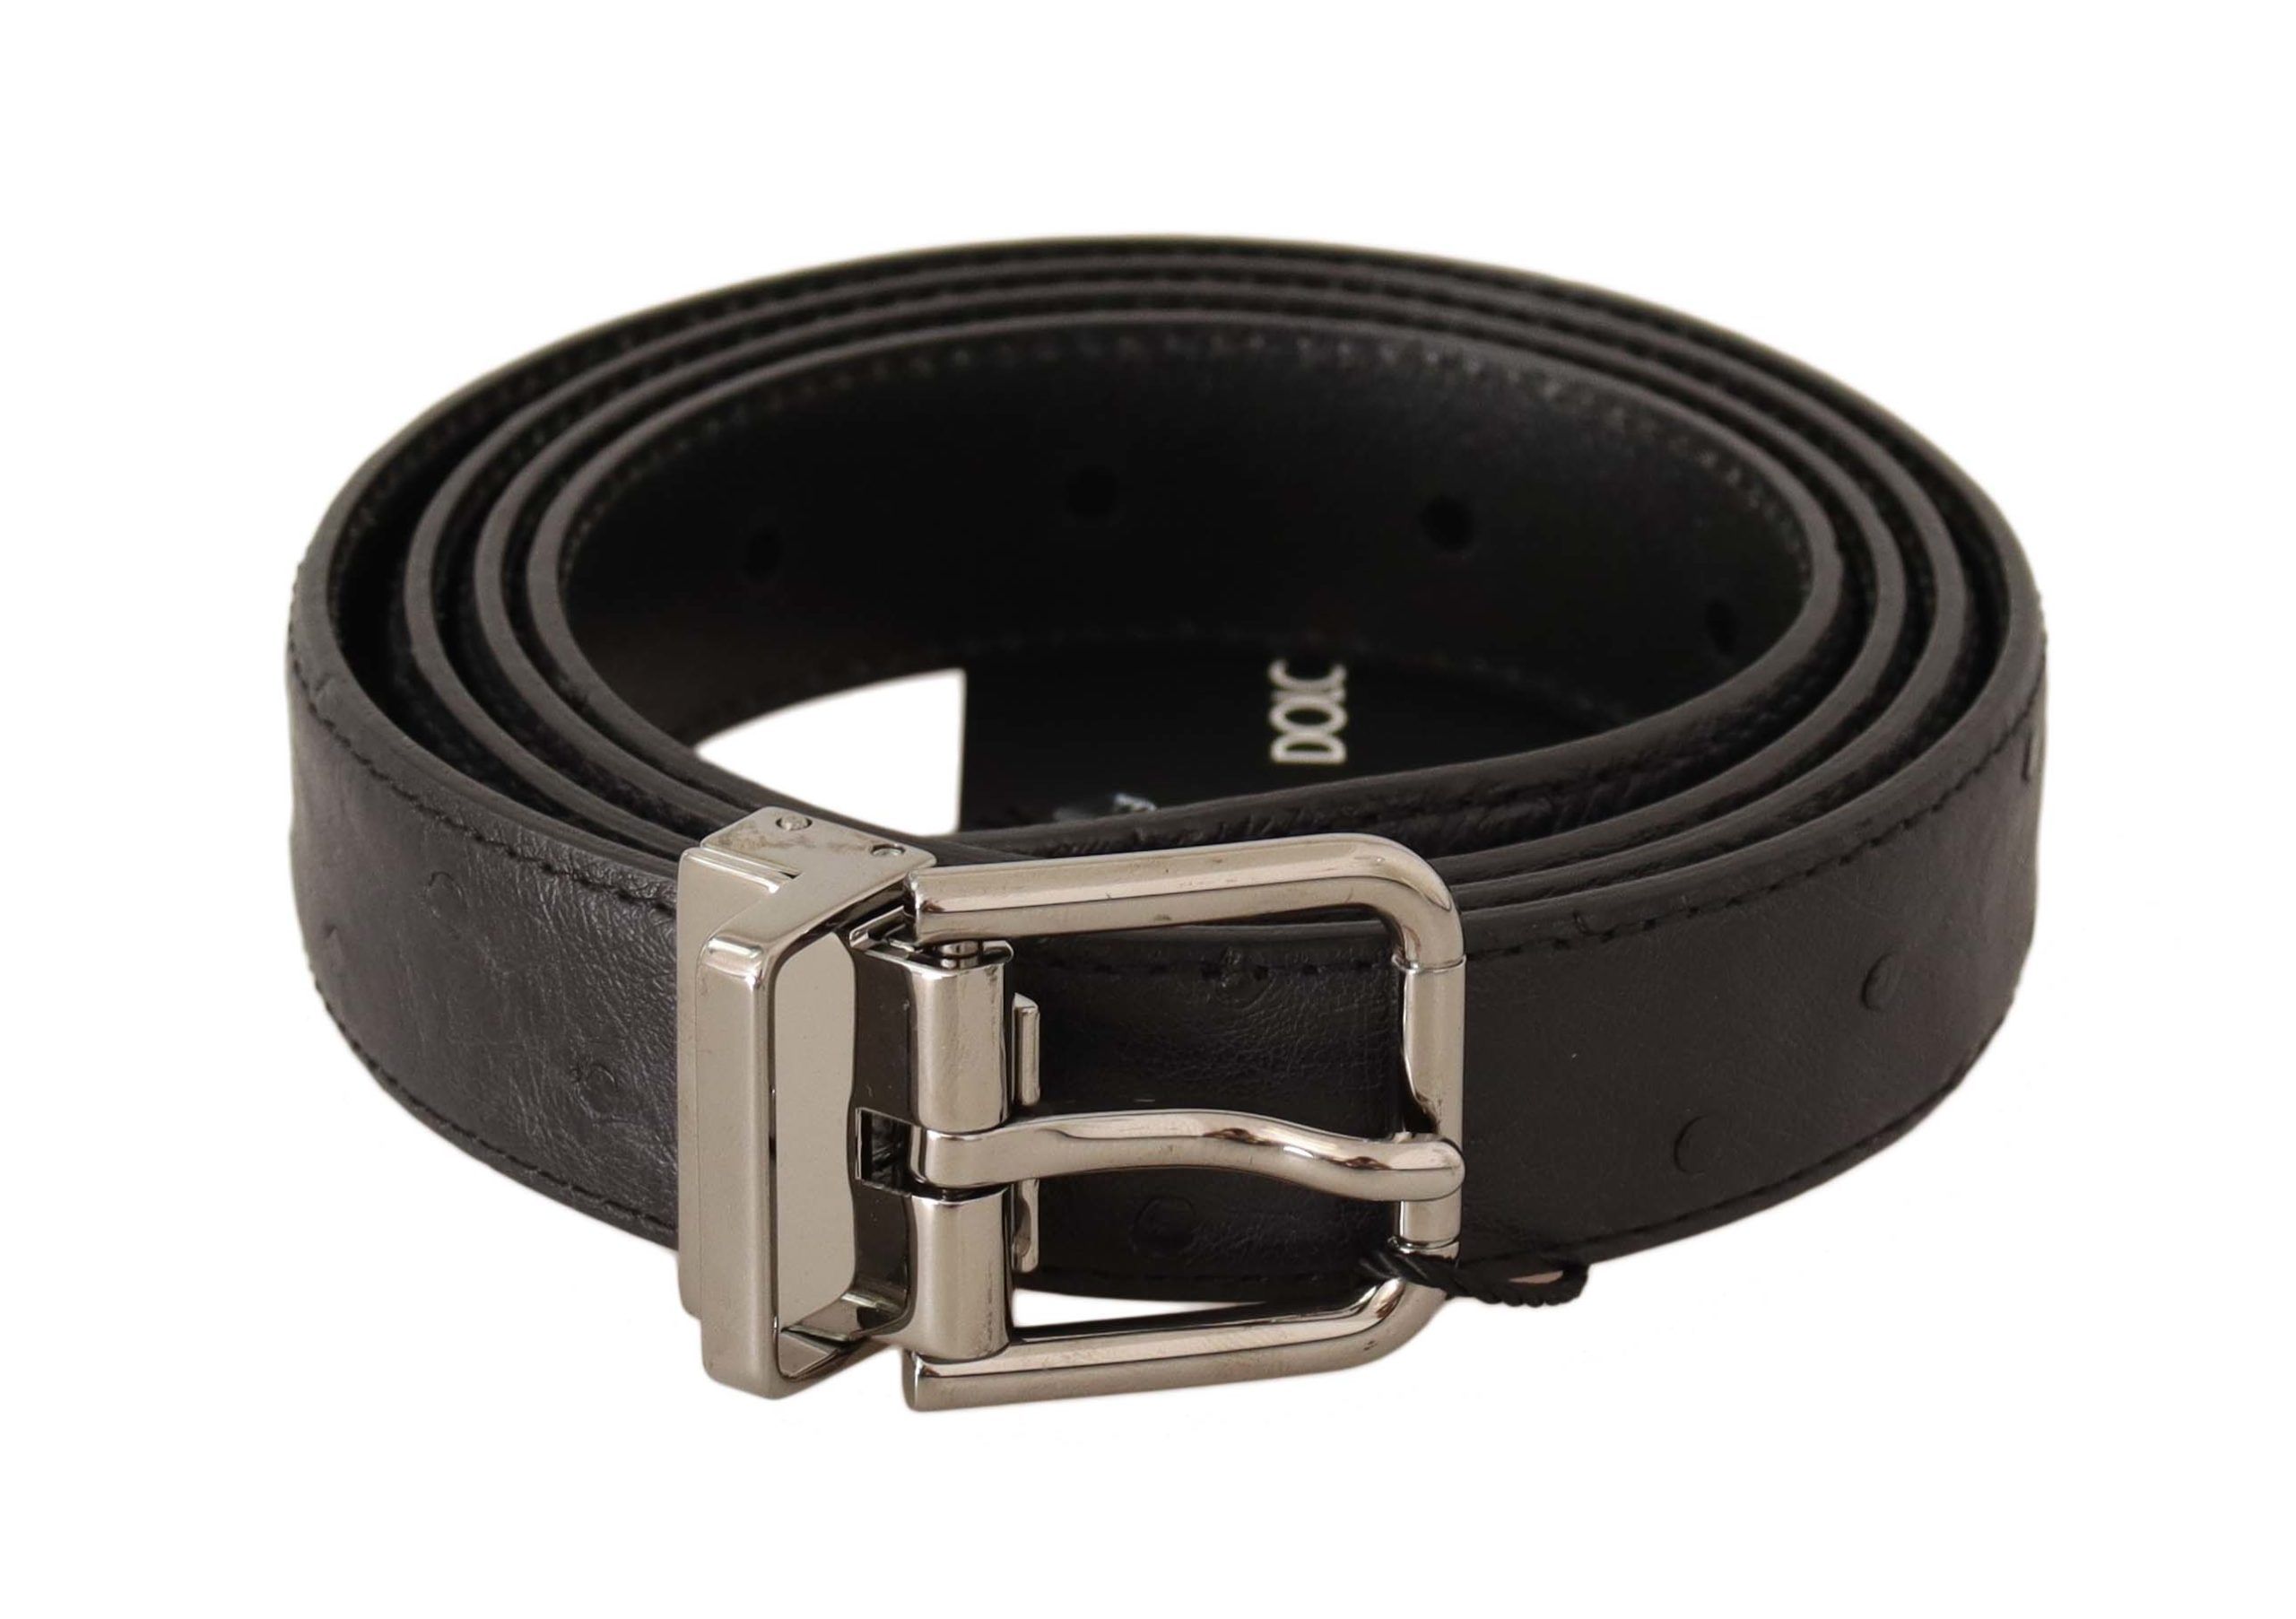 Dolce Gabbana Black Exotic Leather Silver Buckle Belt 105 cm 42 Inches